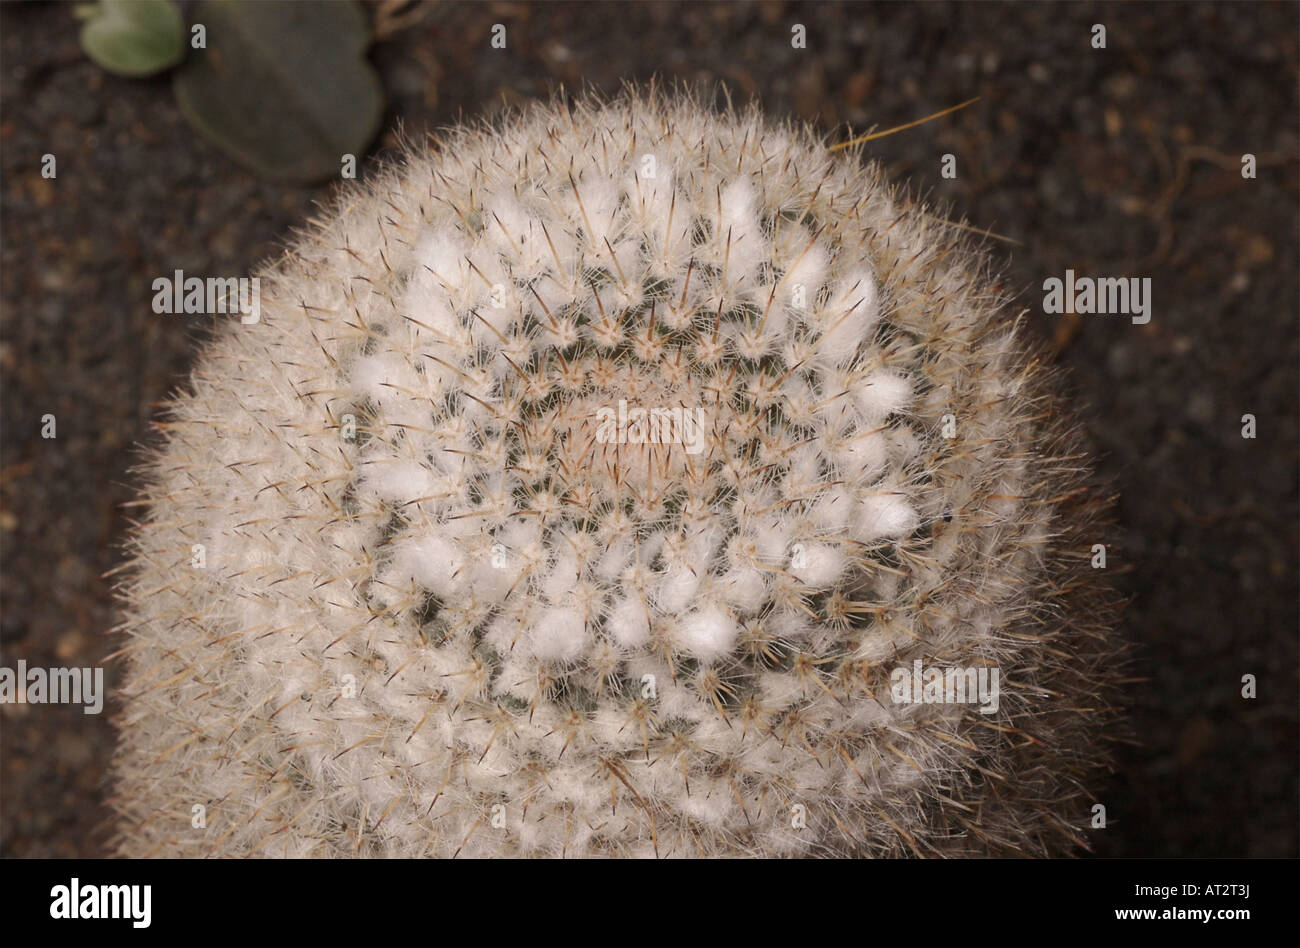 Mammillaria standleyi, a cactus native to Northwest Mexico, uses white hairy fibers to shade itself from too much sun. Stock Photo